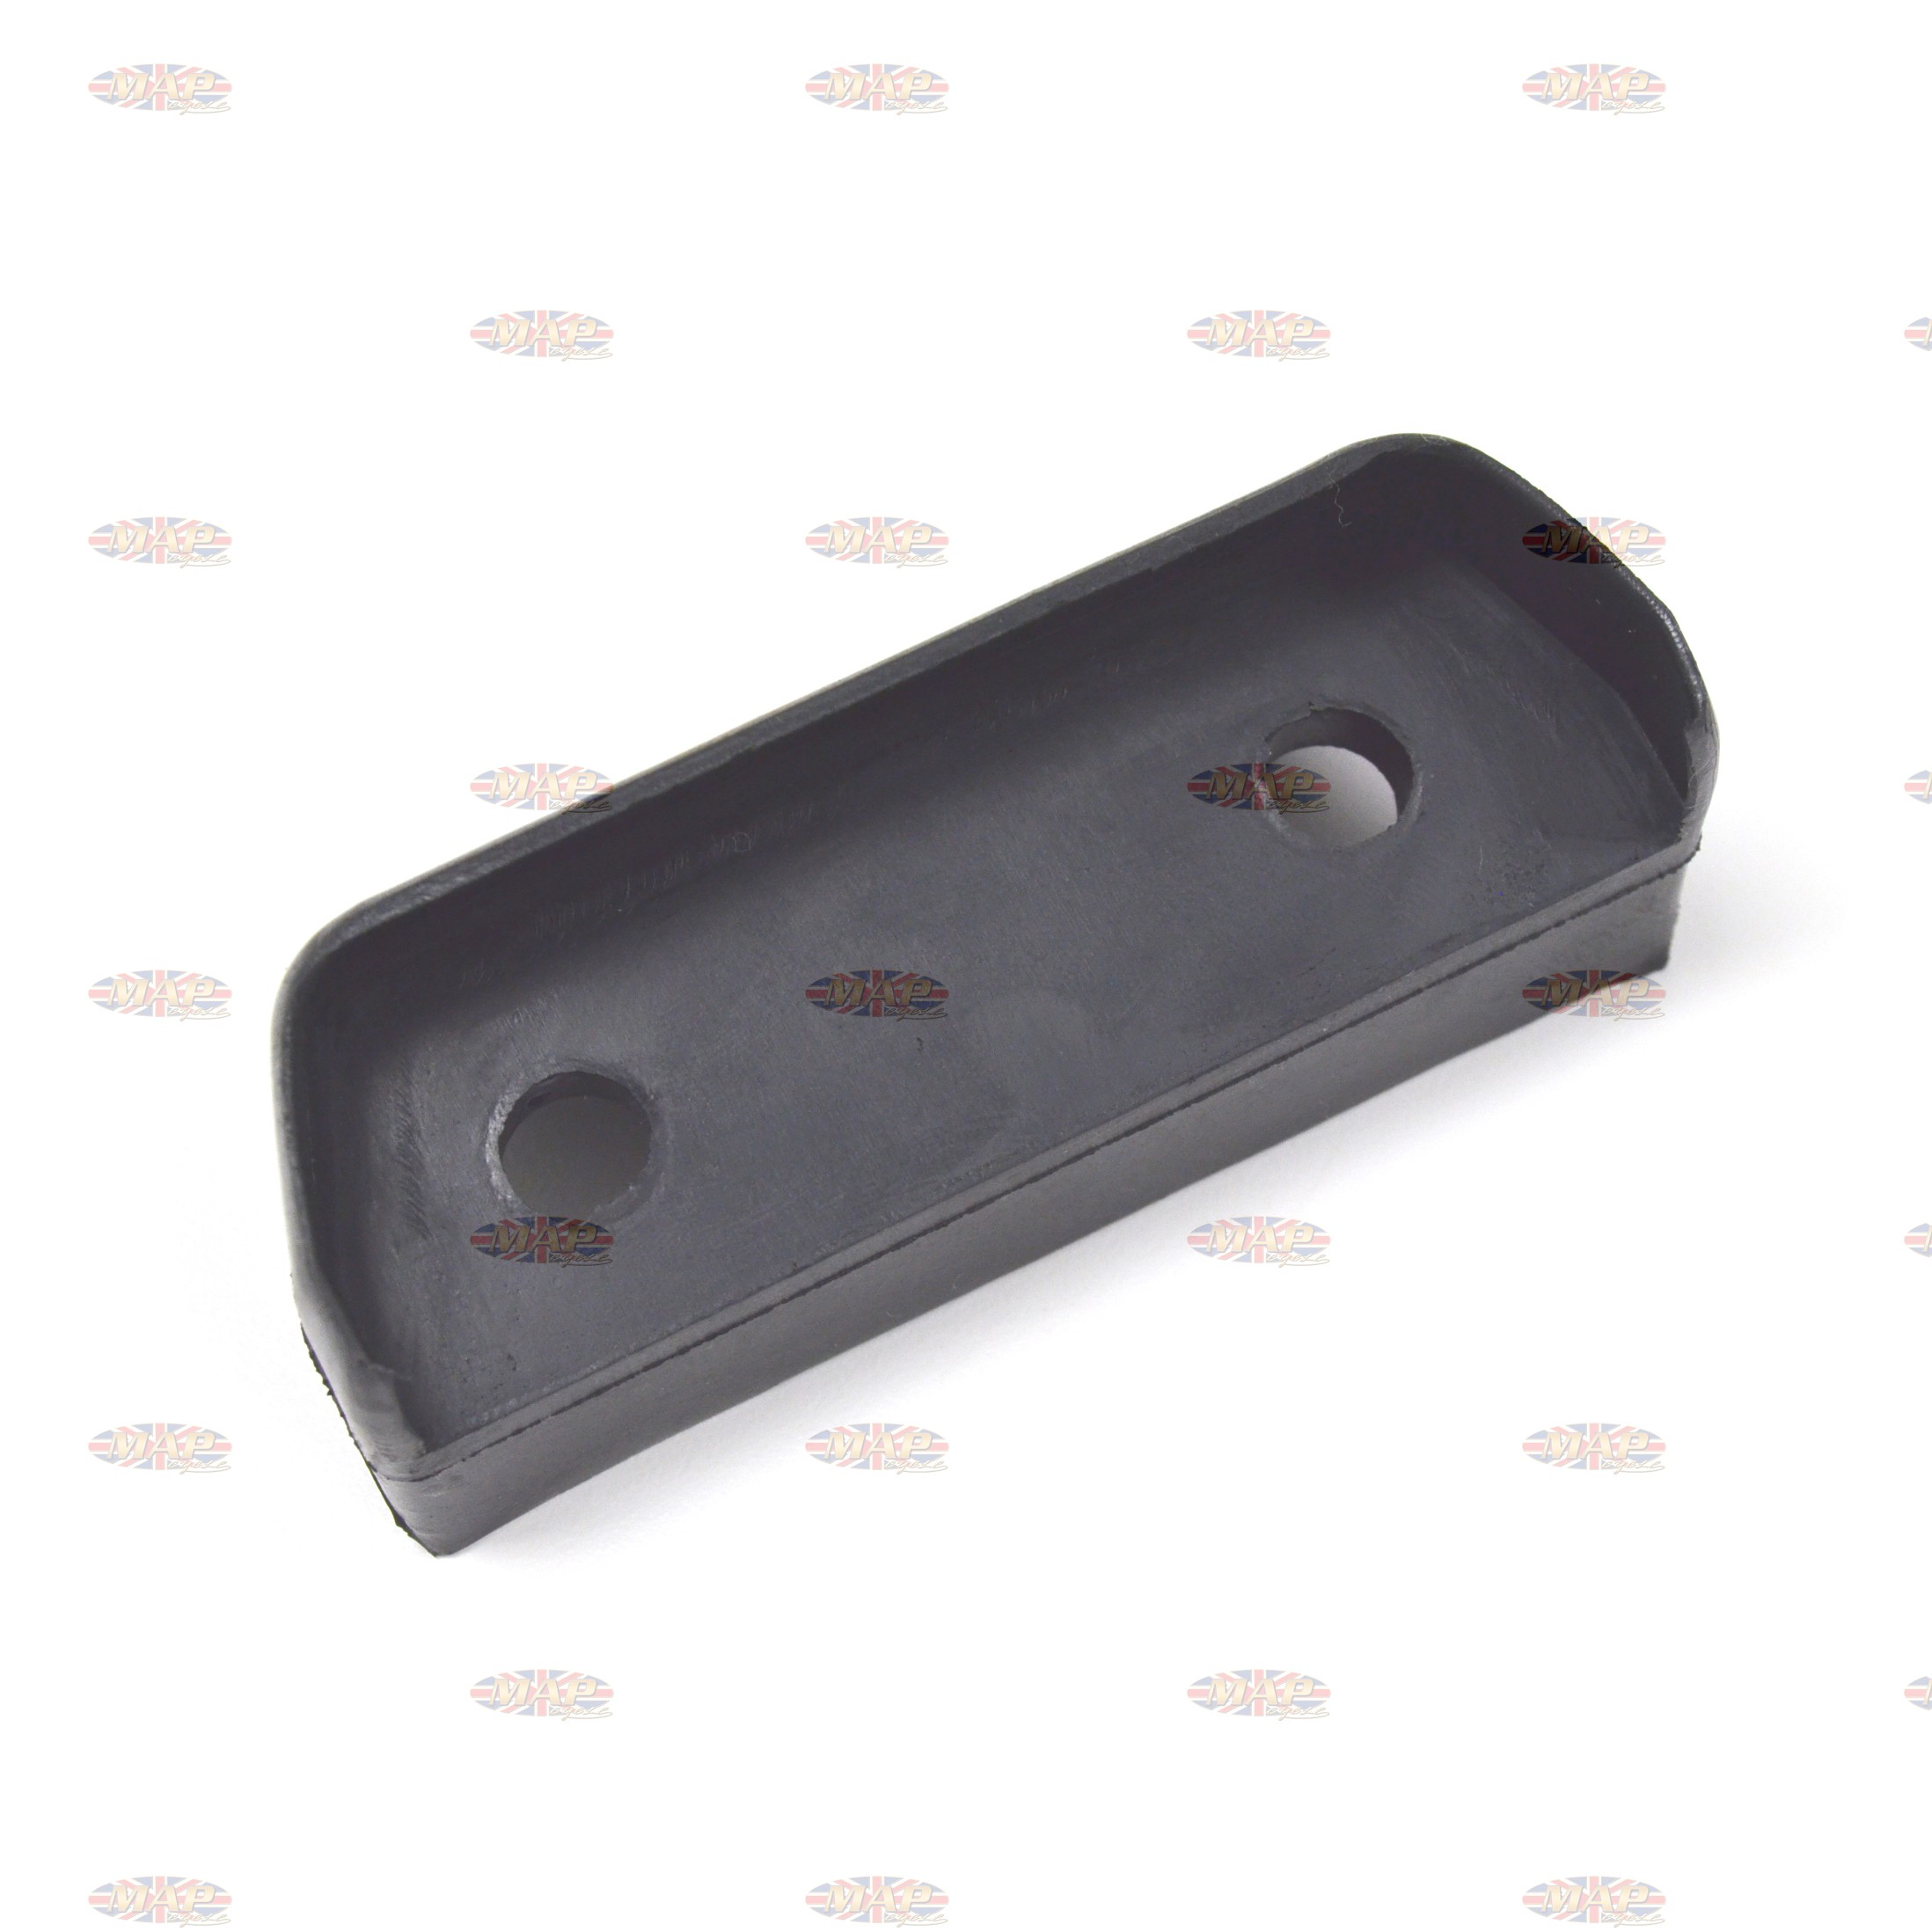 Triumph Headlight Ear Bracket Mounting Rubber - Sold Individually 97-2208